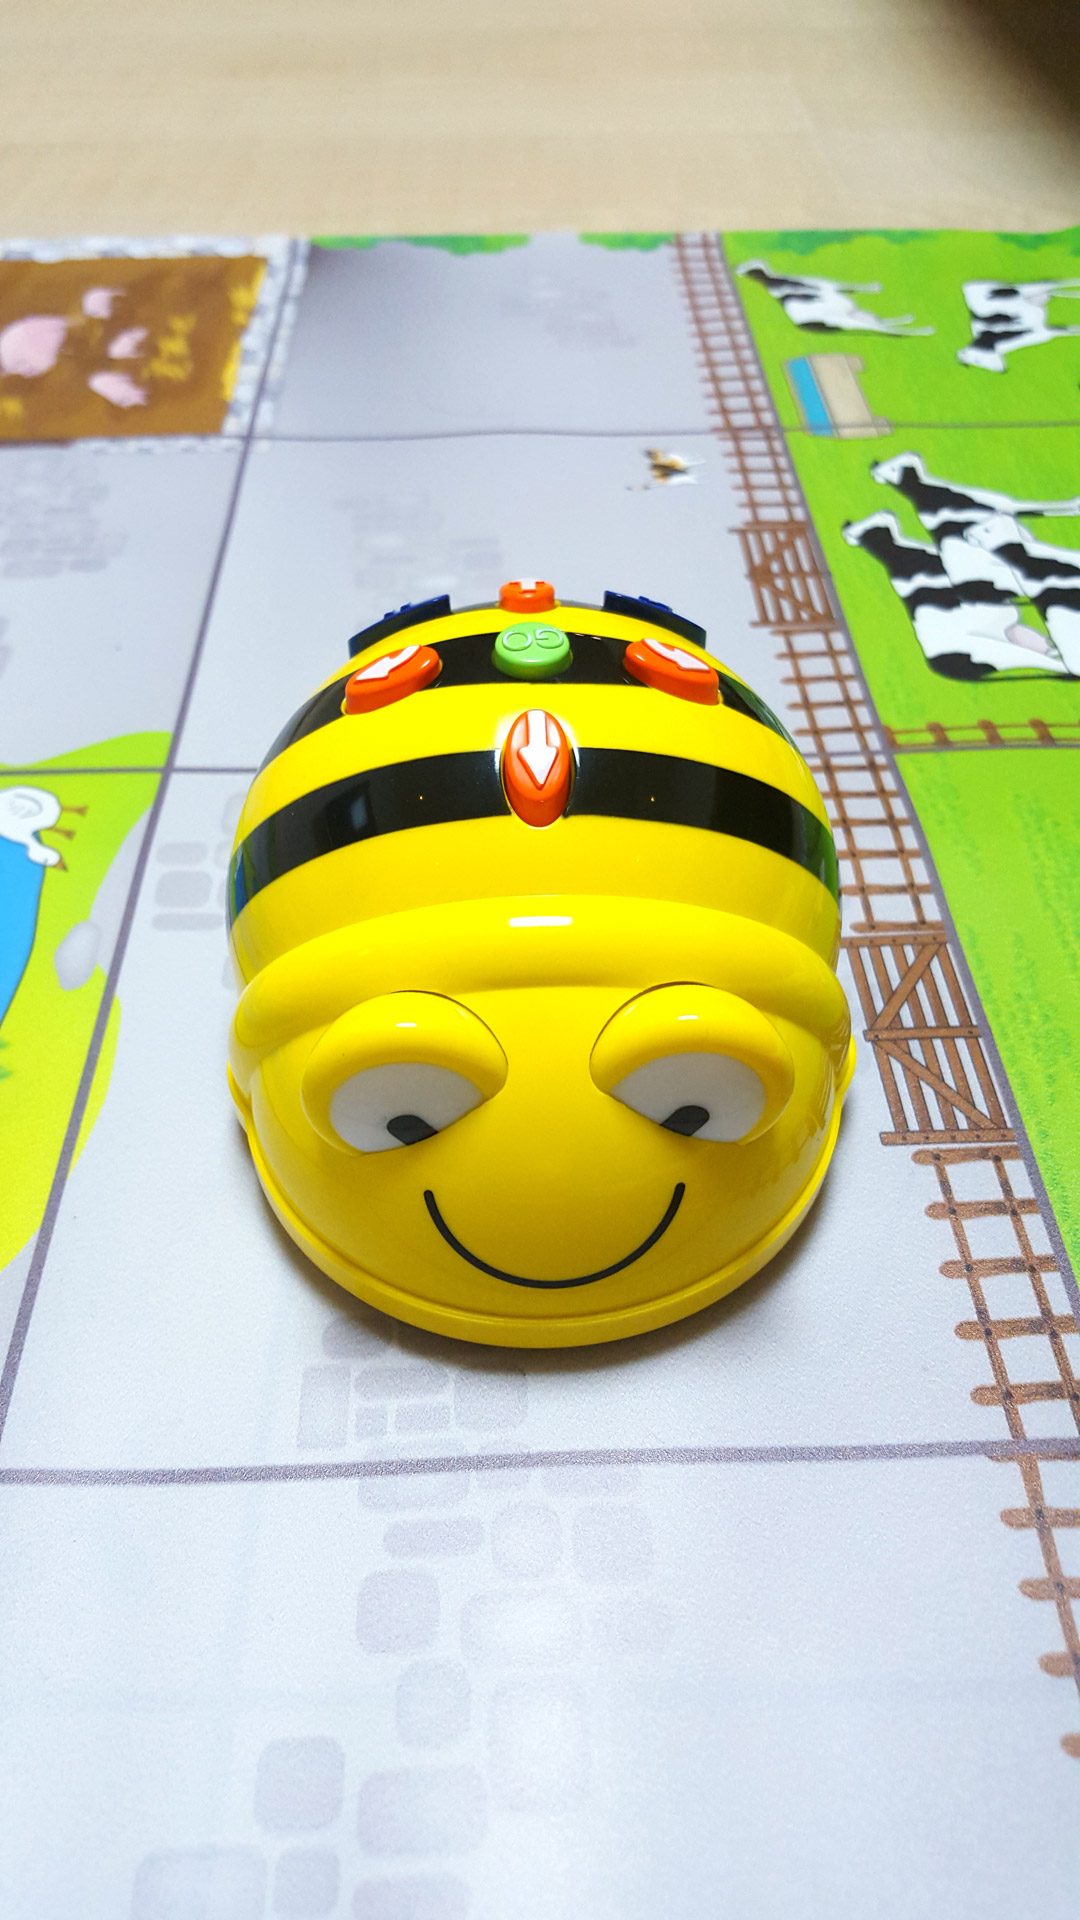 bee-bot-coding-bee-bot-free-pictures-free-photos-free-image-from